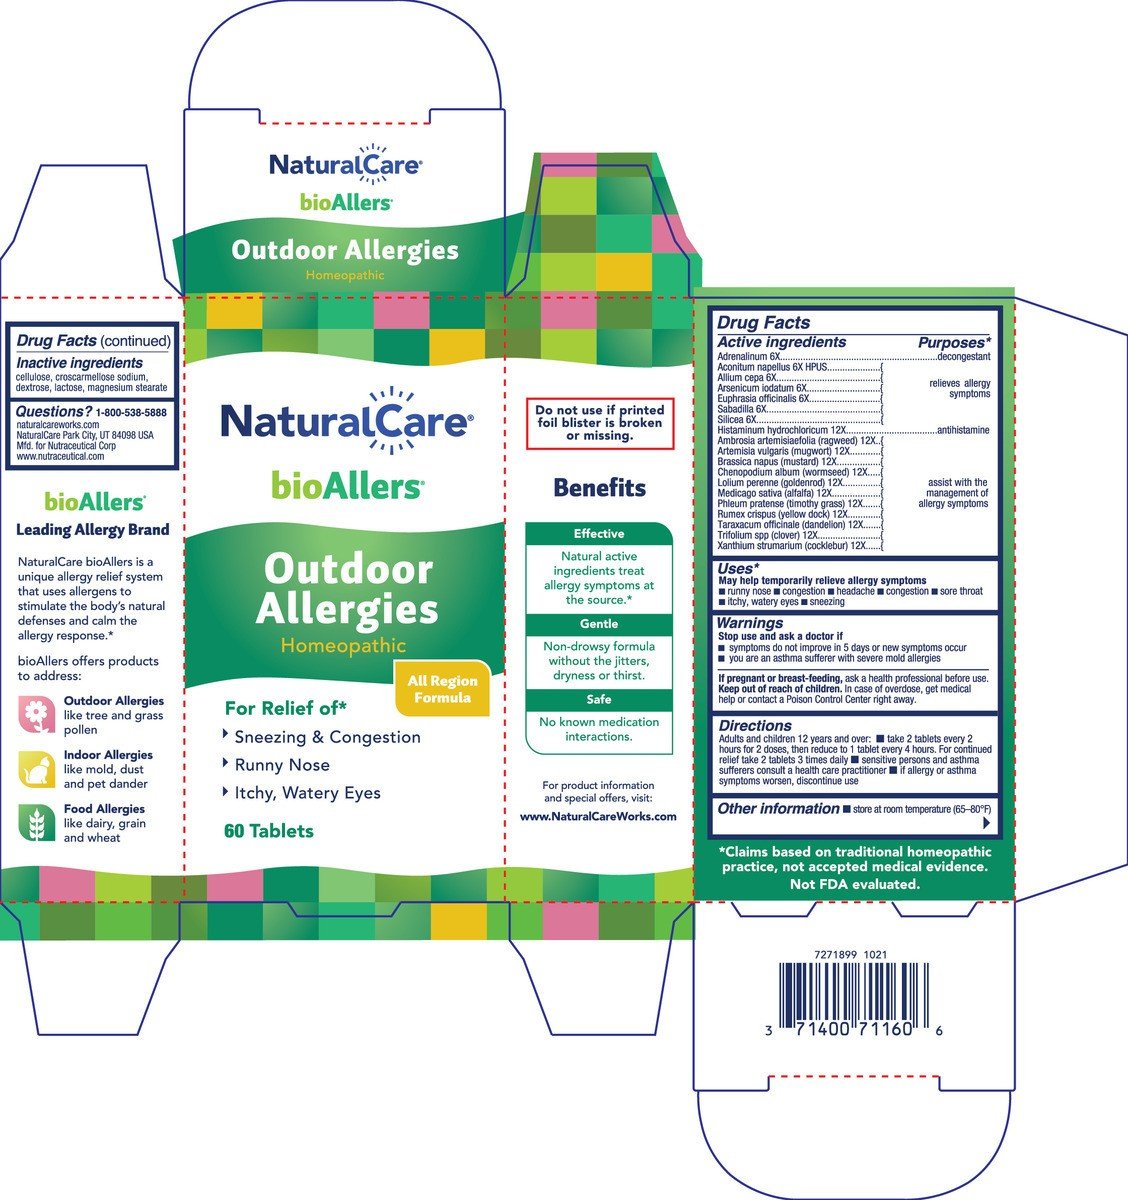 NaturalCare Outdoor Allergy 60 Tablet